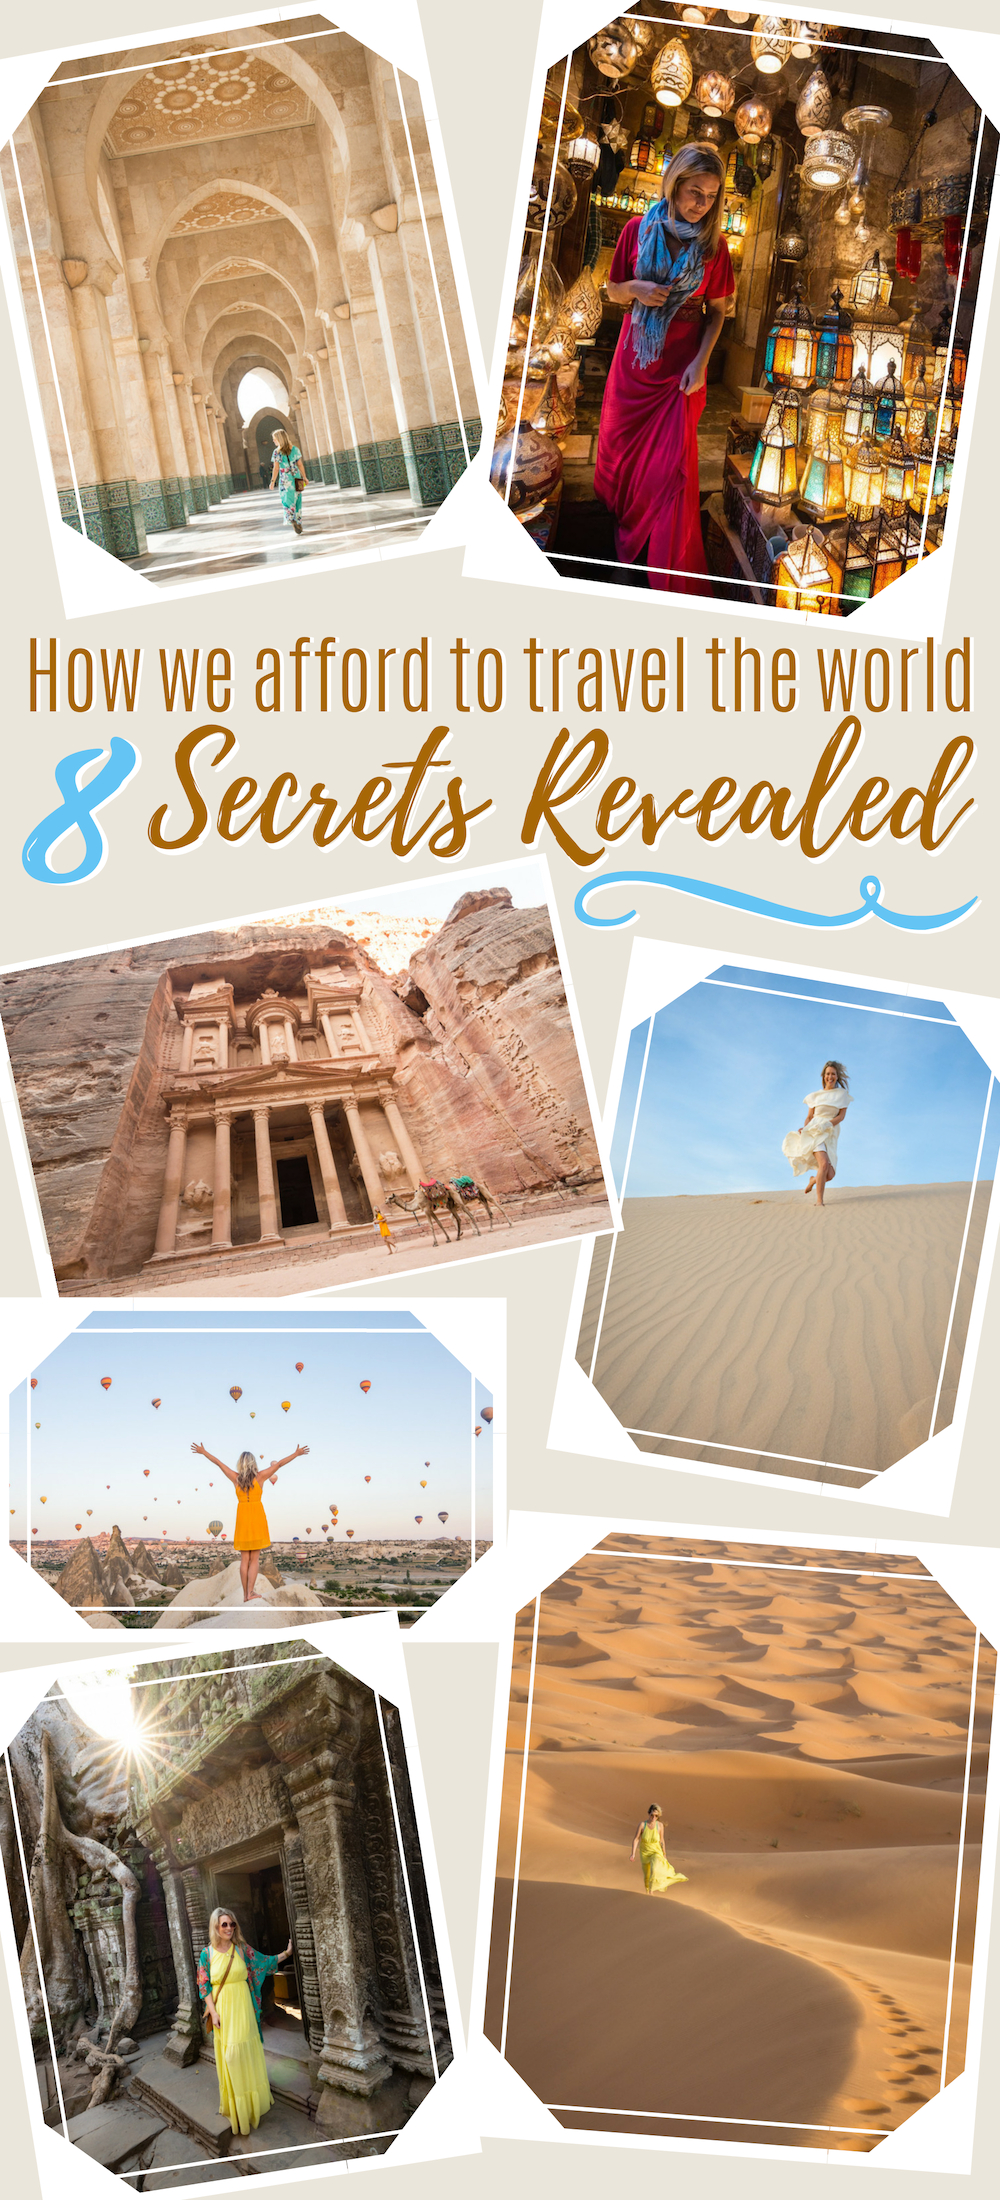 How to Afford to Travel: Tips, Secrets, & Advice - Pinterest